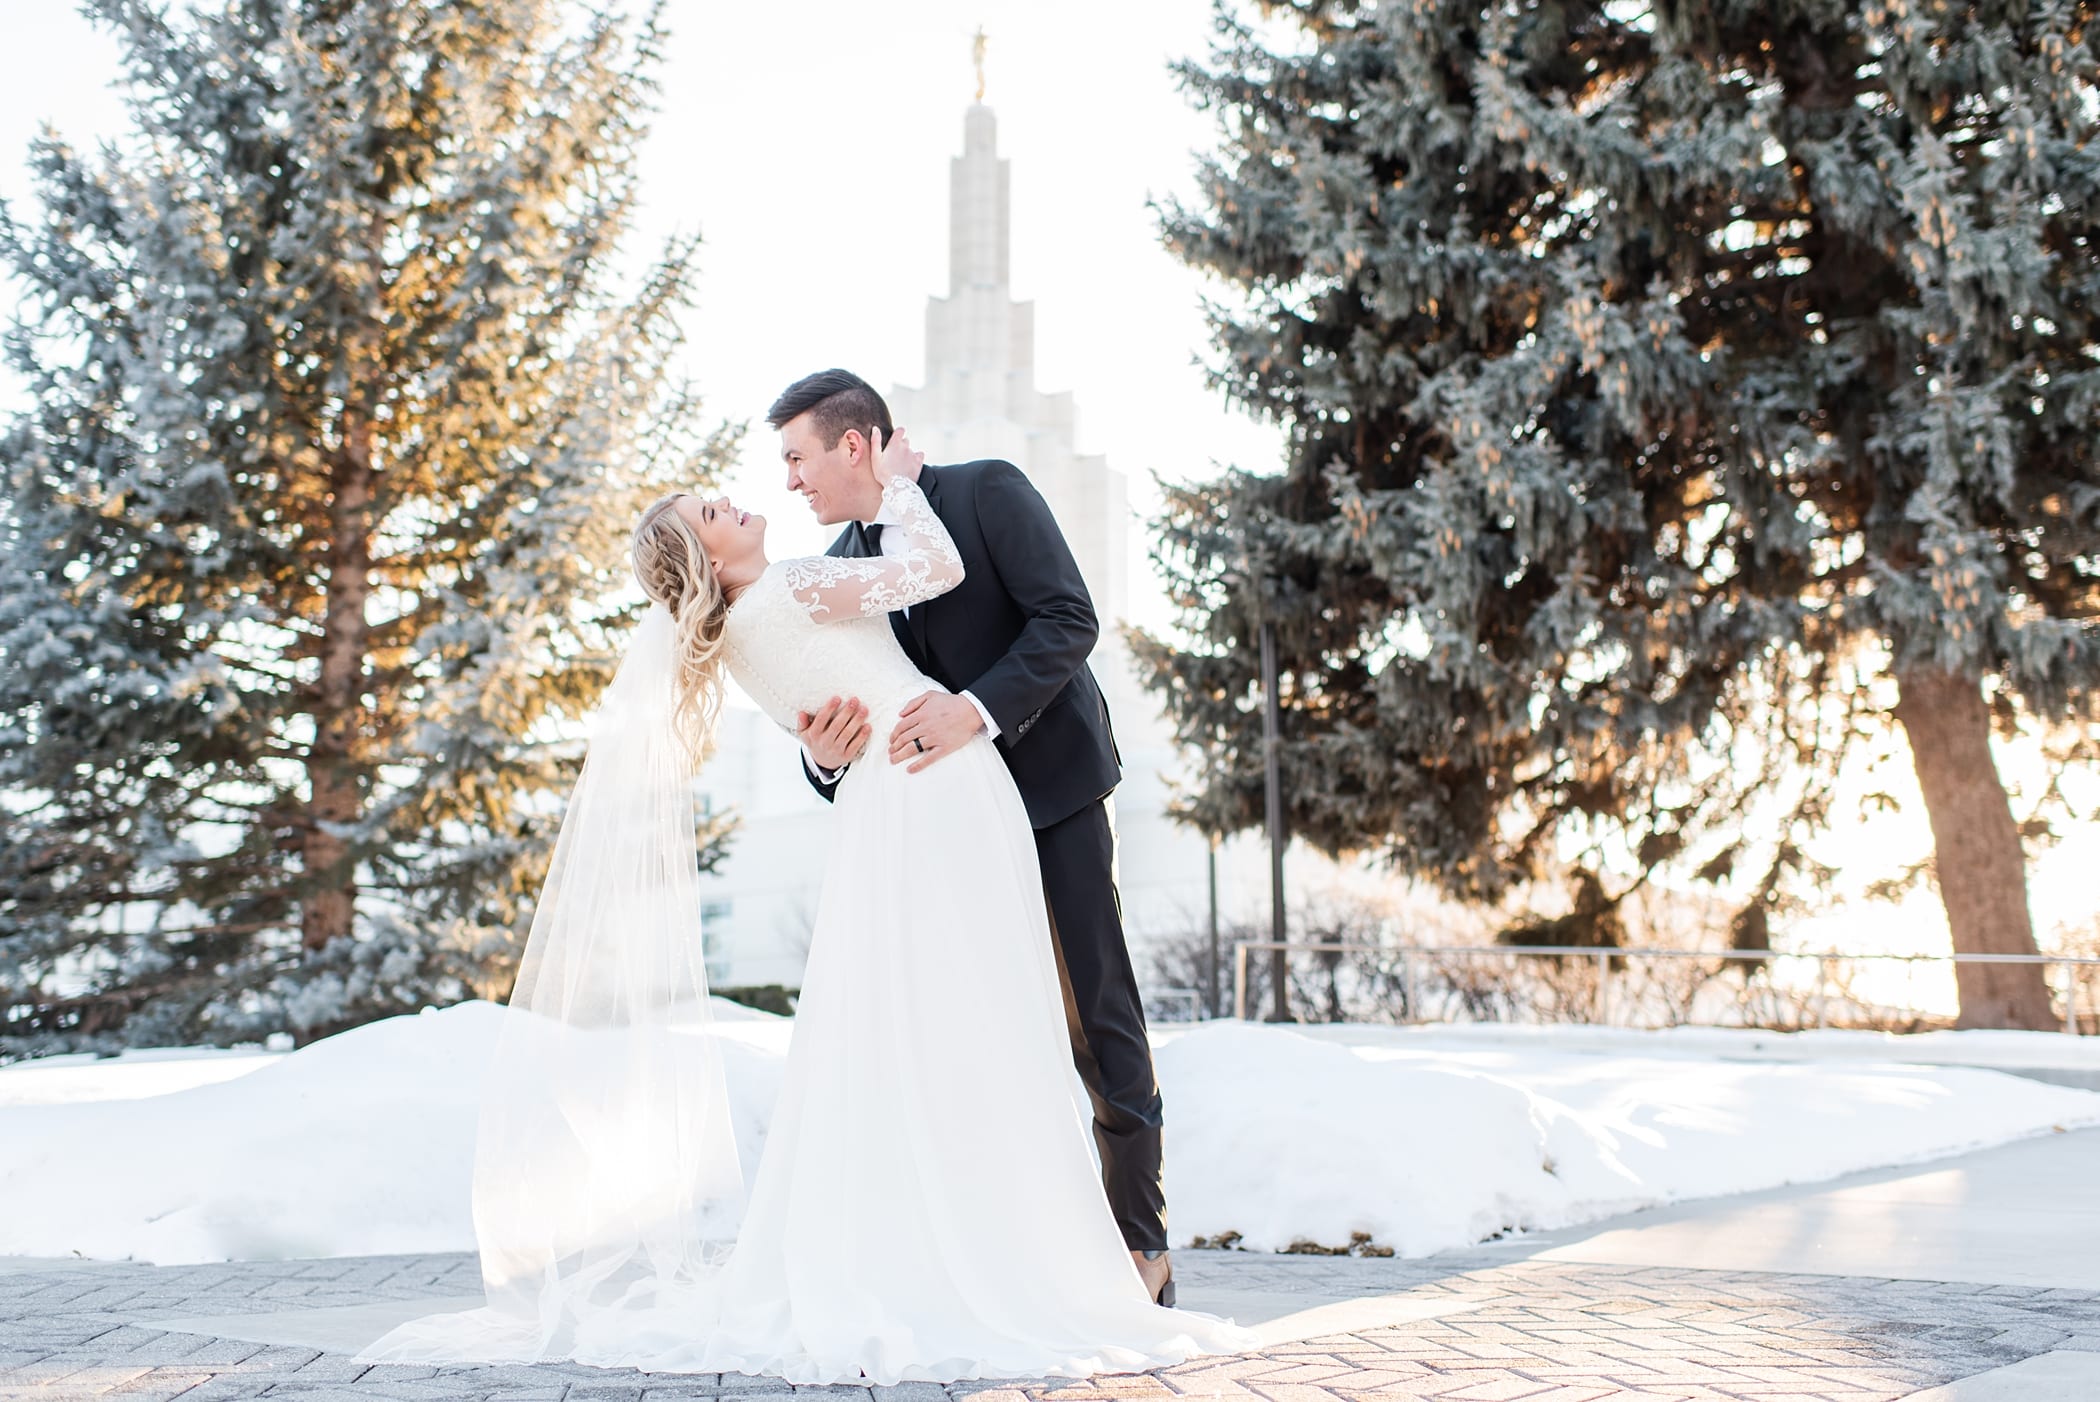 Idaho Falls Temple bridal session and first look